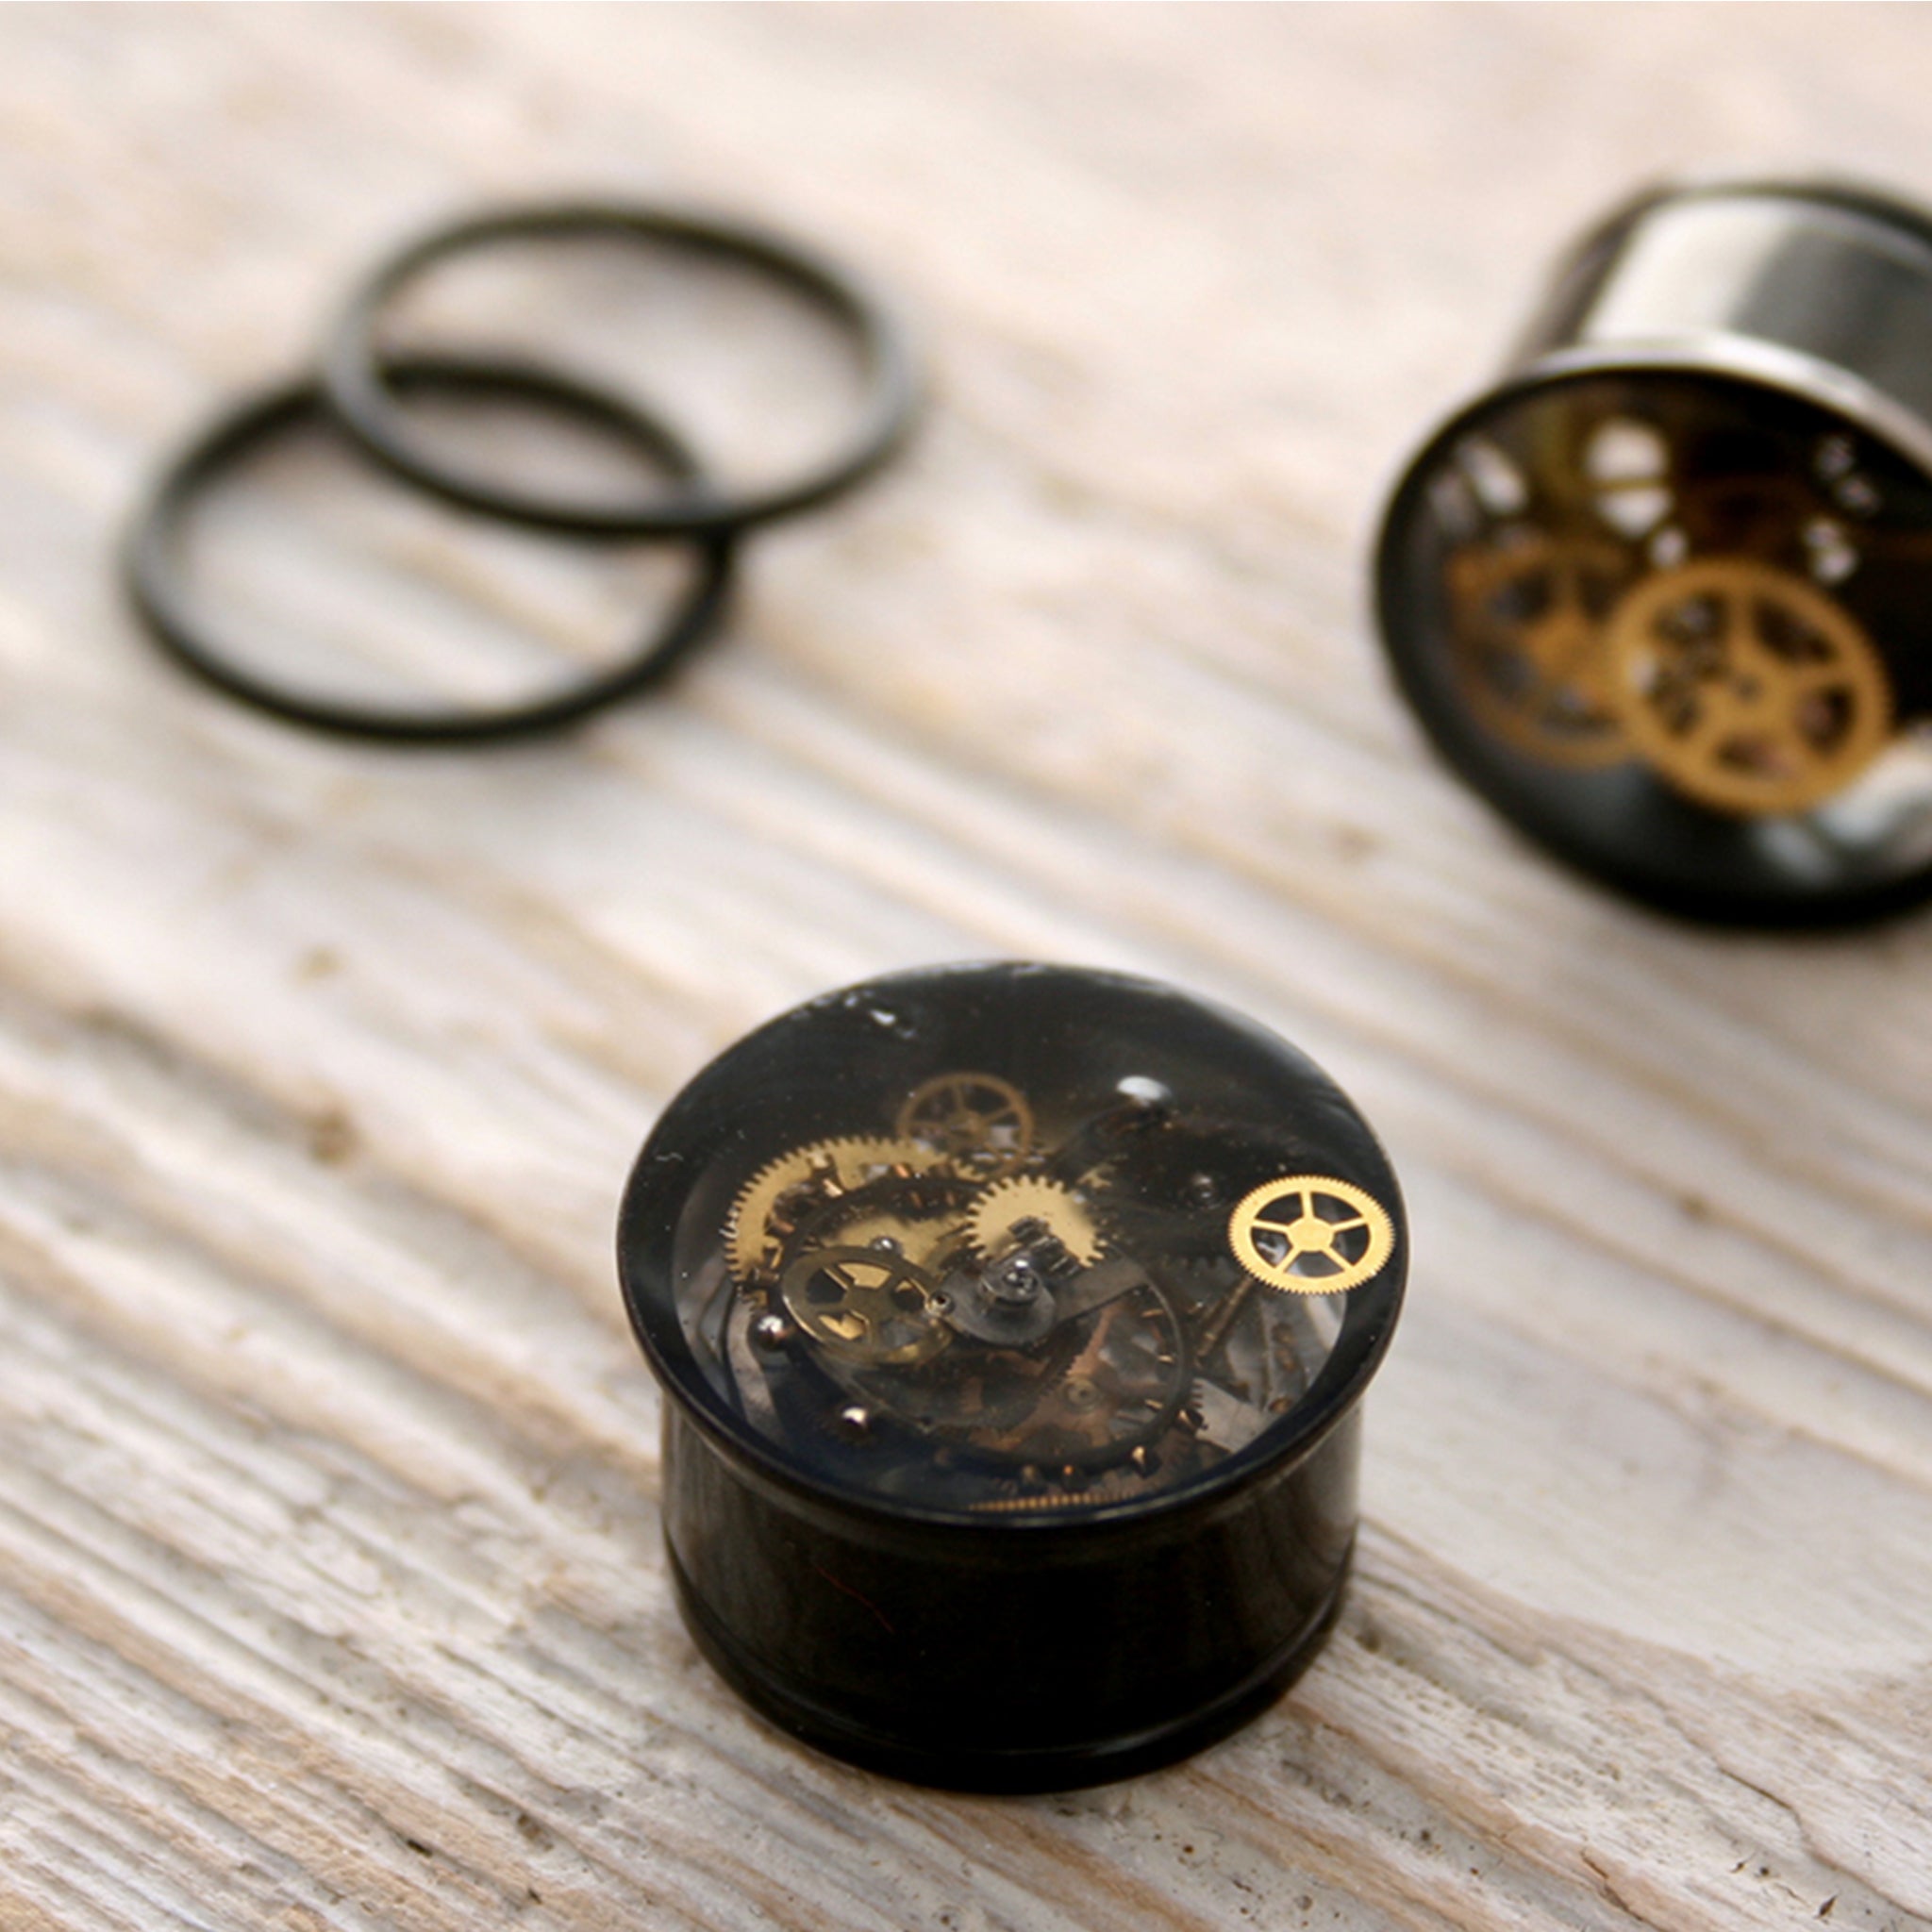 16mm ear gauges in steampunk style with silicone o-rings